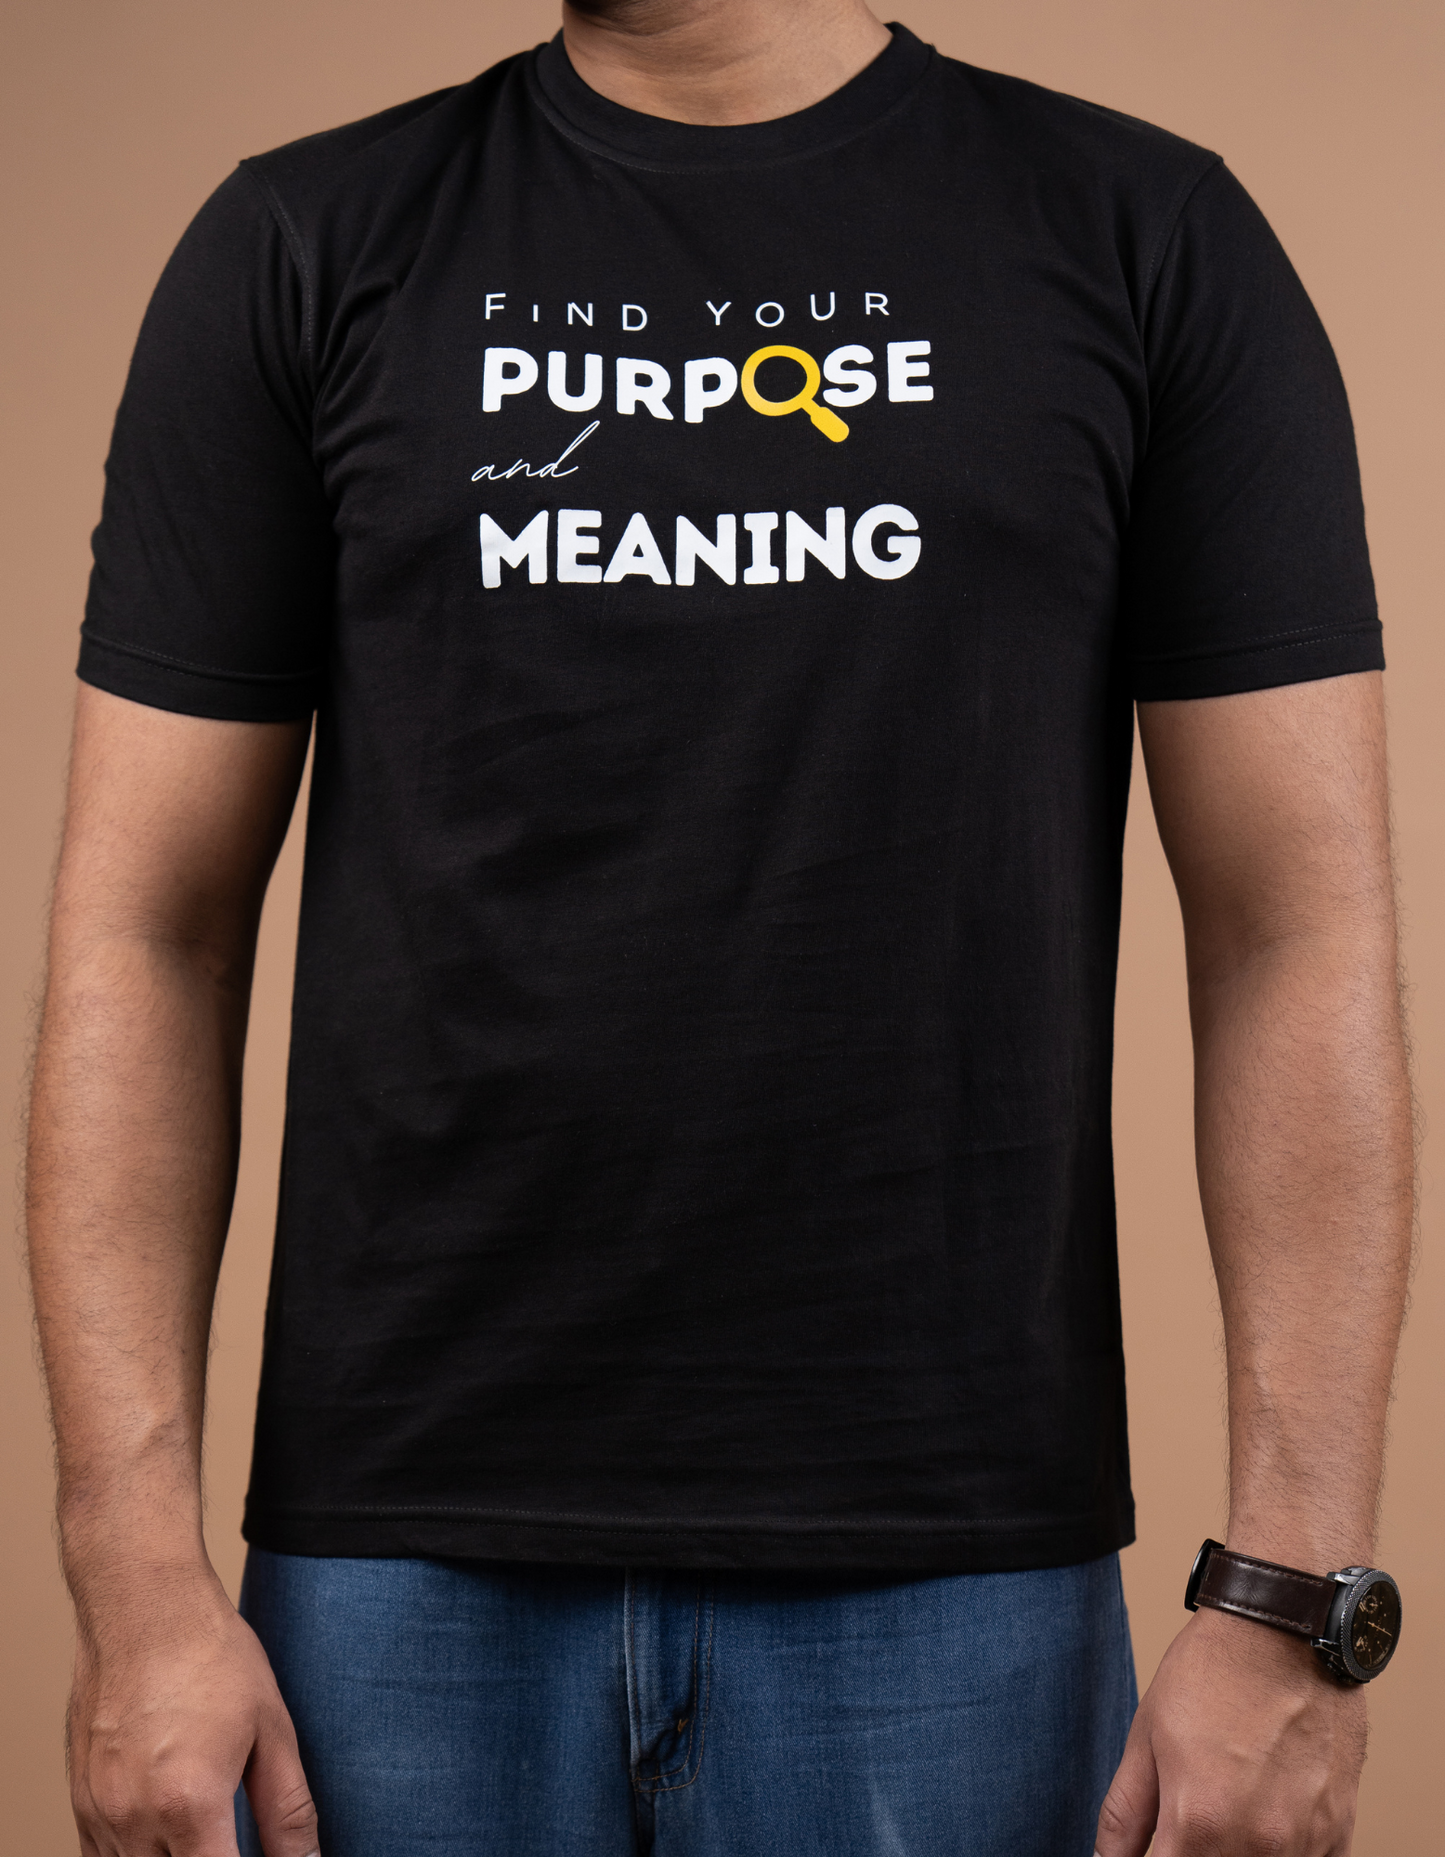 Find your purpose & meaning T-shirt